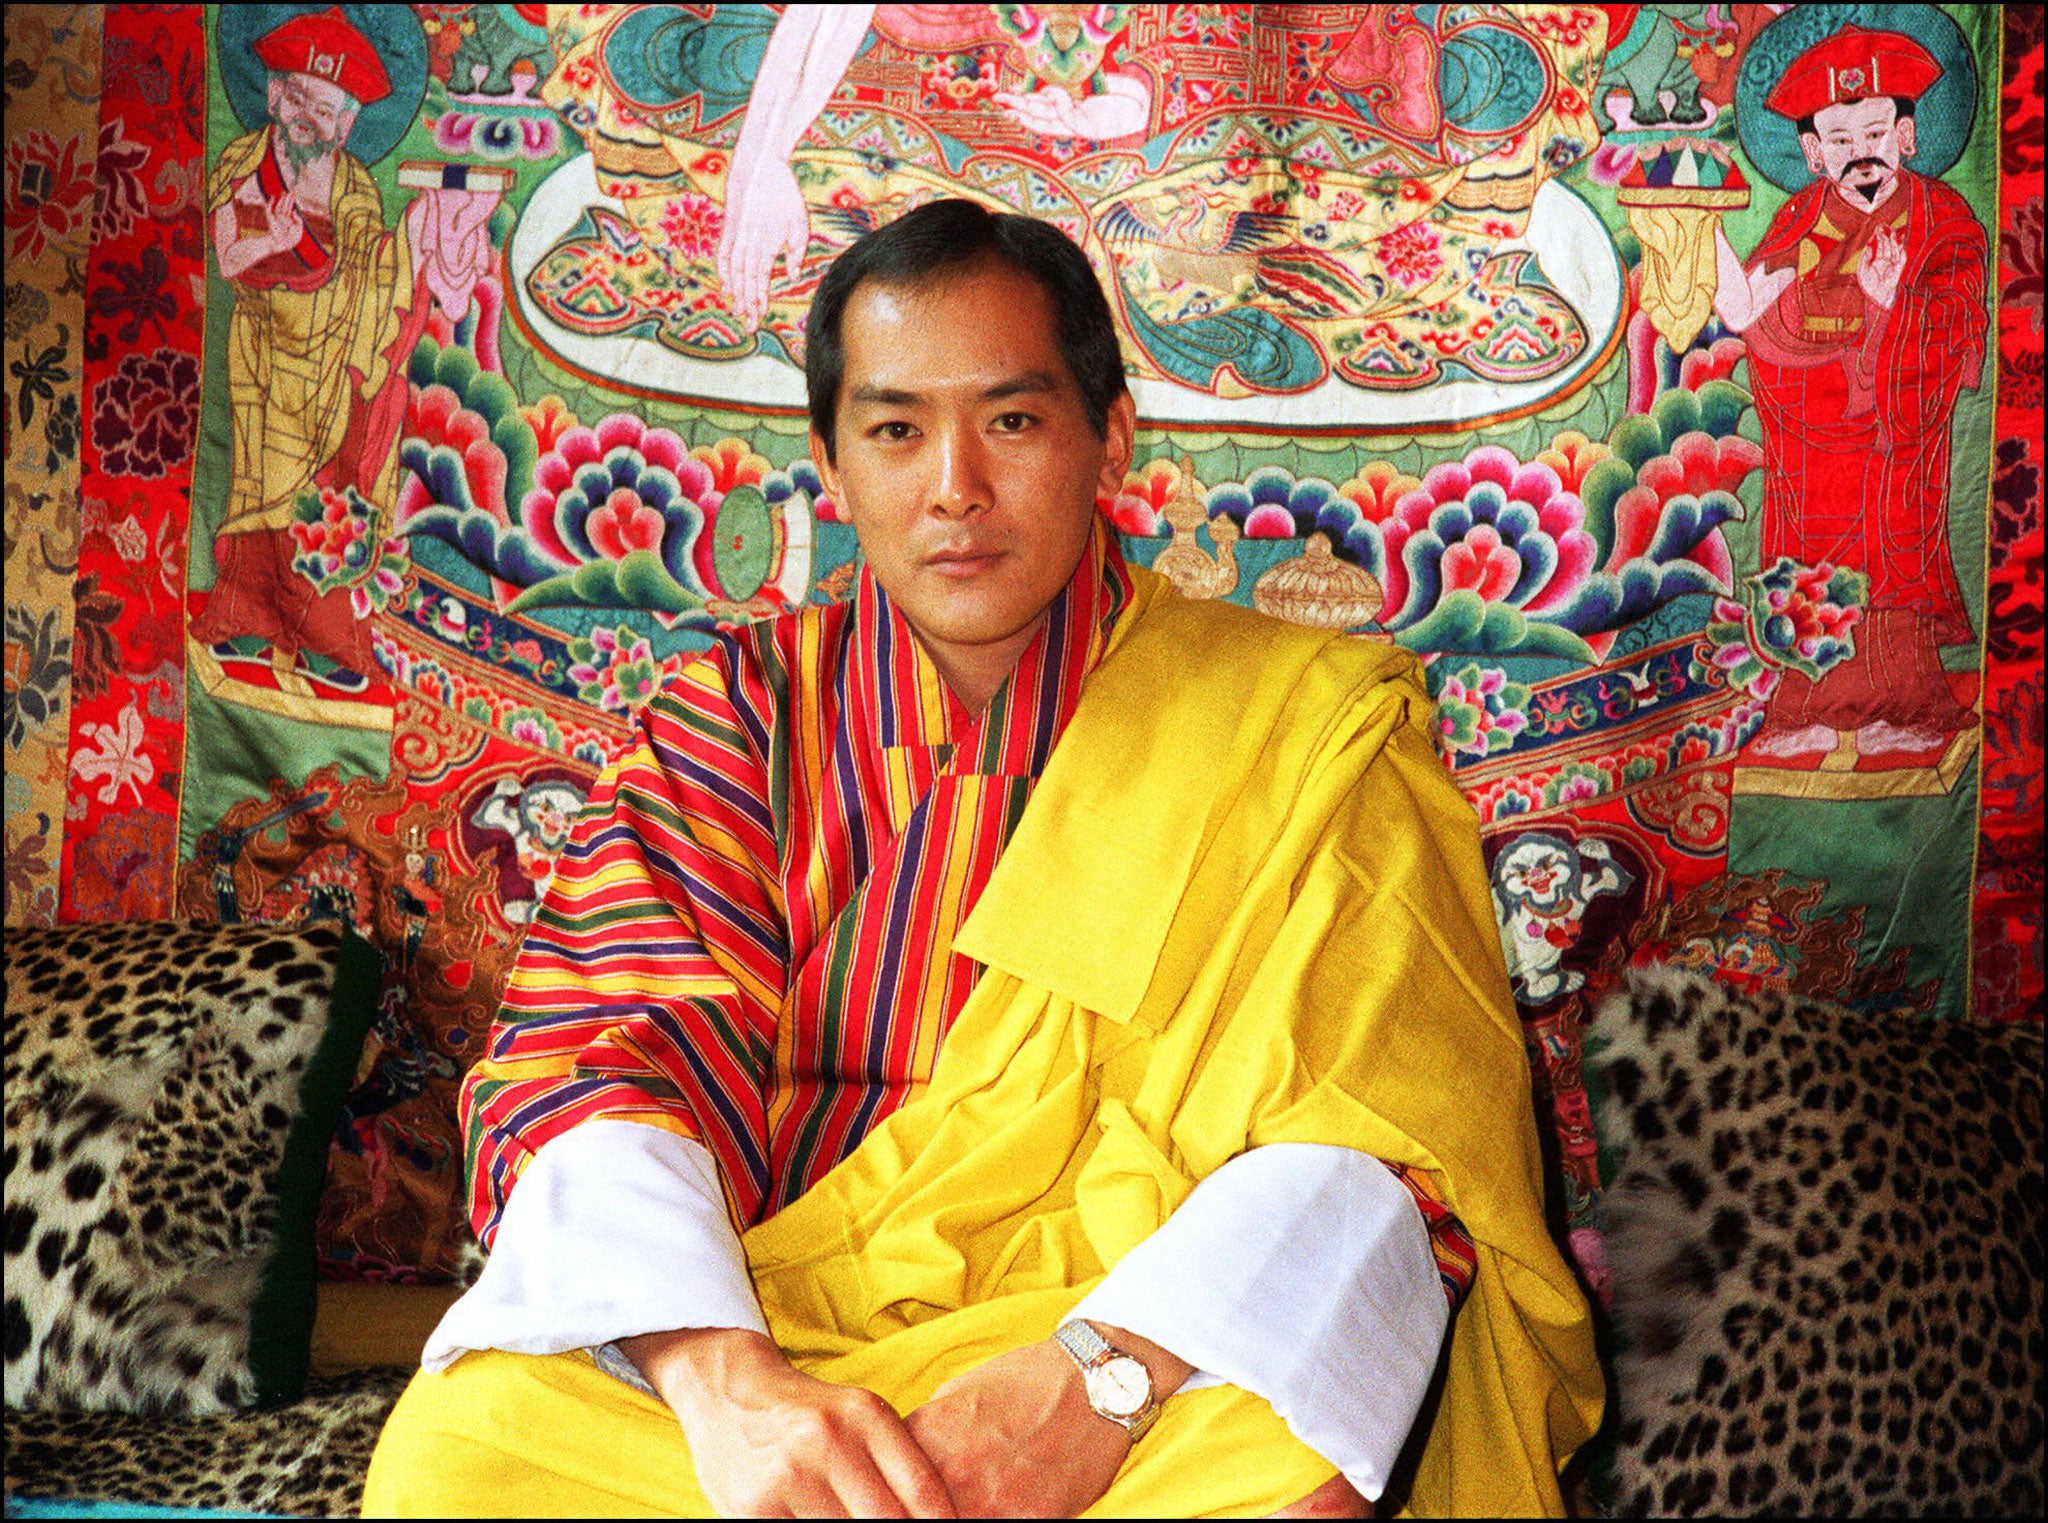 Bhutan's former king, Jigme Singye Wangchuck, first proposed a Gross National Happiness index back in 1972